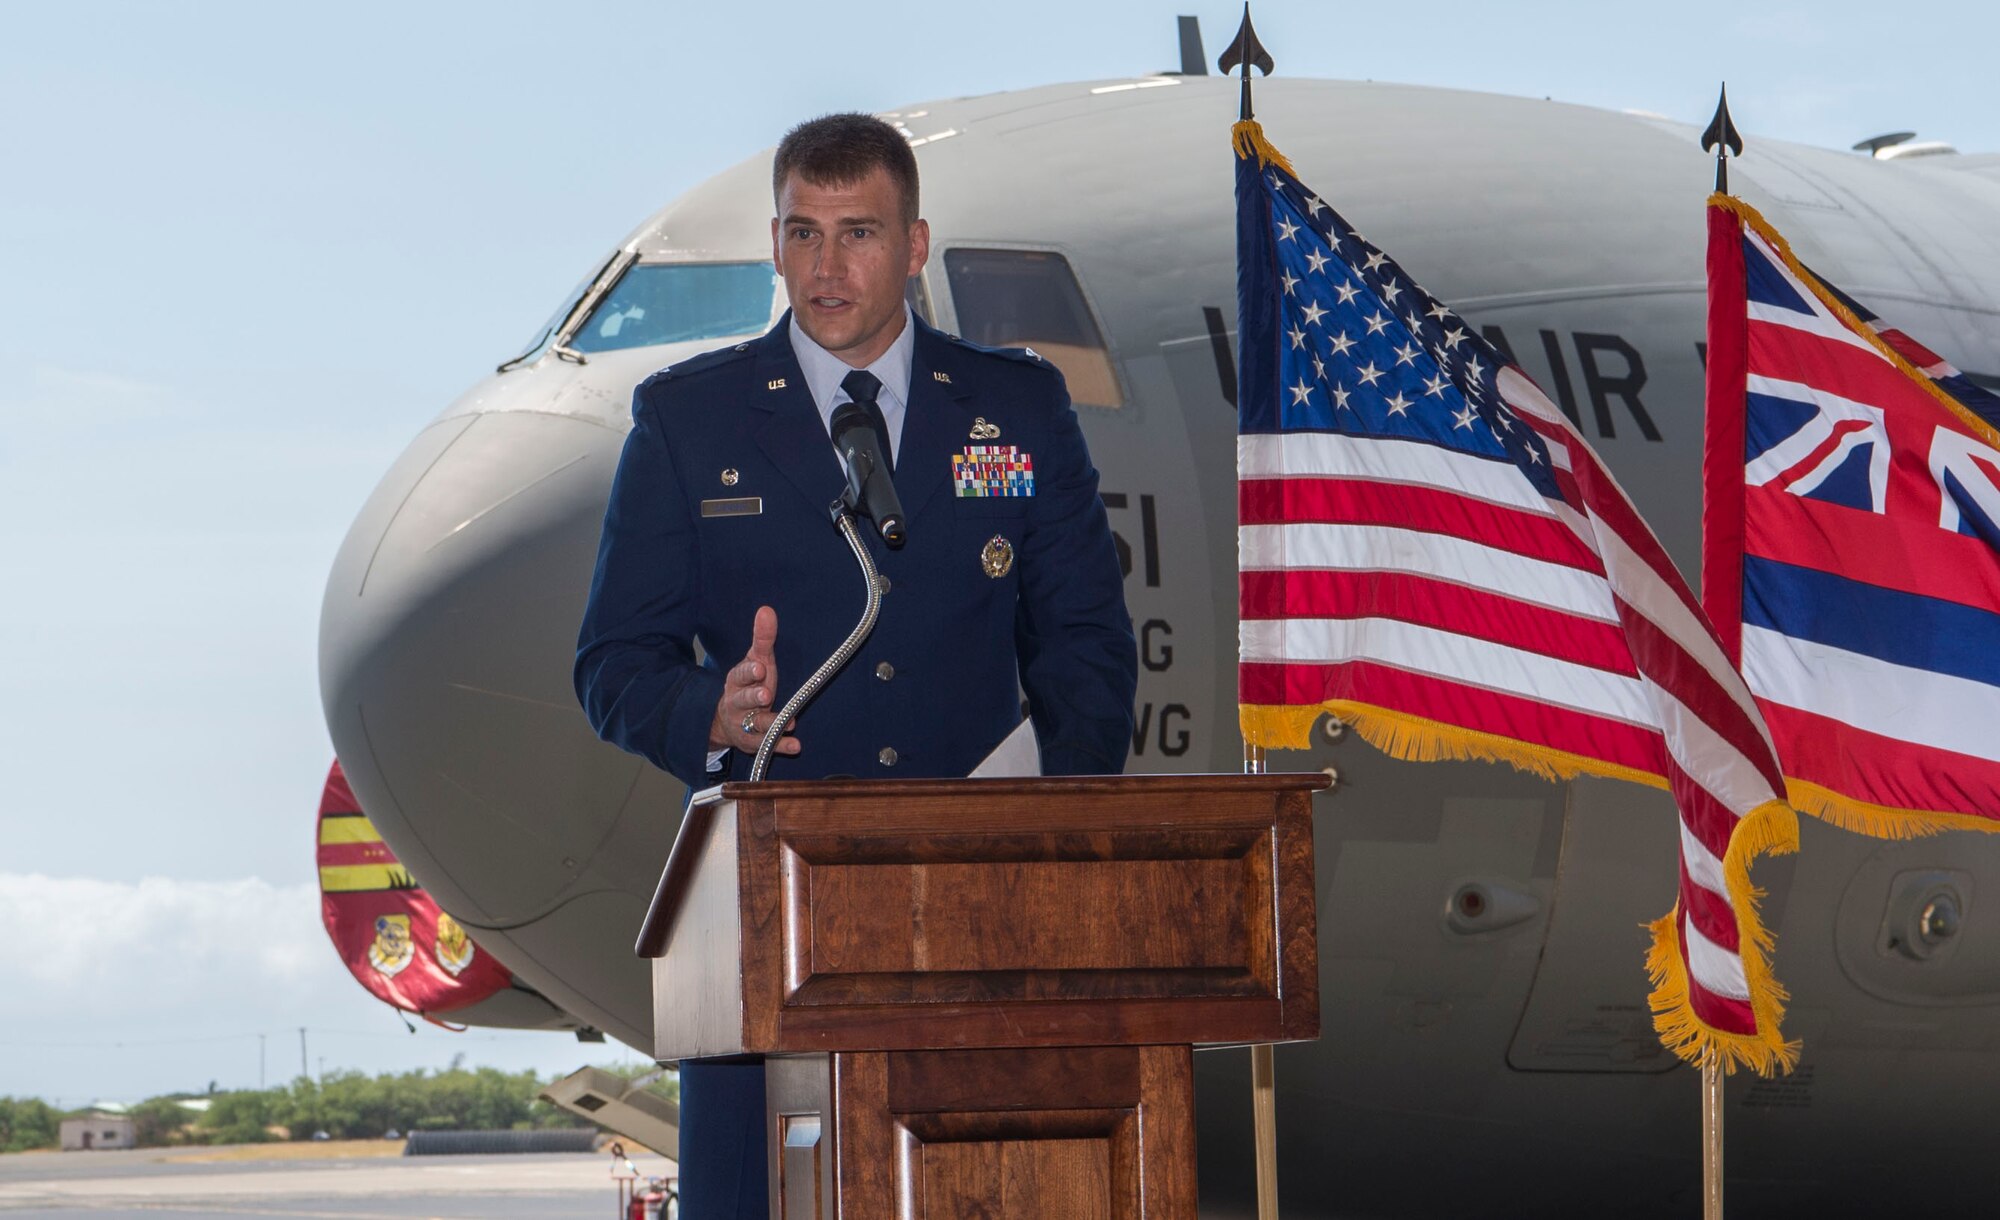 Col. Dominic Clementz, 15th Maintenance Group commander, gives the closing remarks during the MXG change of command ceremony, Joint Base Pearl Harbor-Hickam, Hawaii, July 16, 2018. The MXG supports 31 home station aircraft to meet global airlift, global strike and theater security mission requirements and provides support to over 7,200 joint and allied aircraft transiting through Hickam Field each year. (U.S. Air Force photo by Tech. Sgt. Heather Redman)